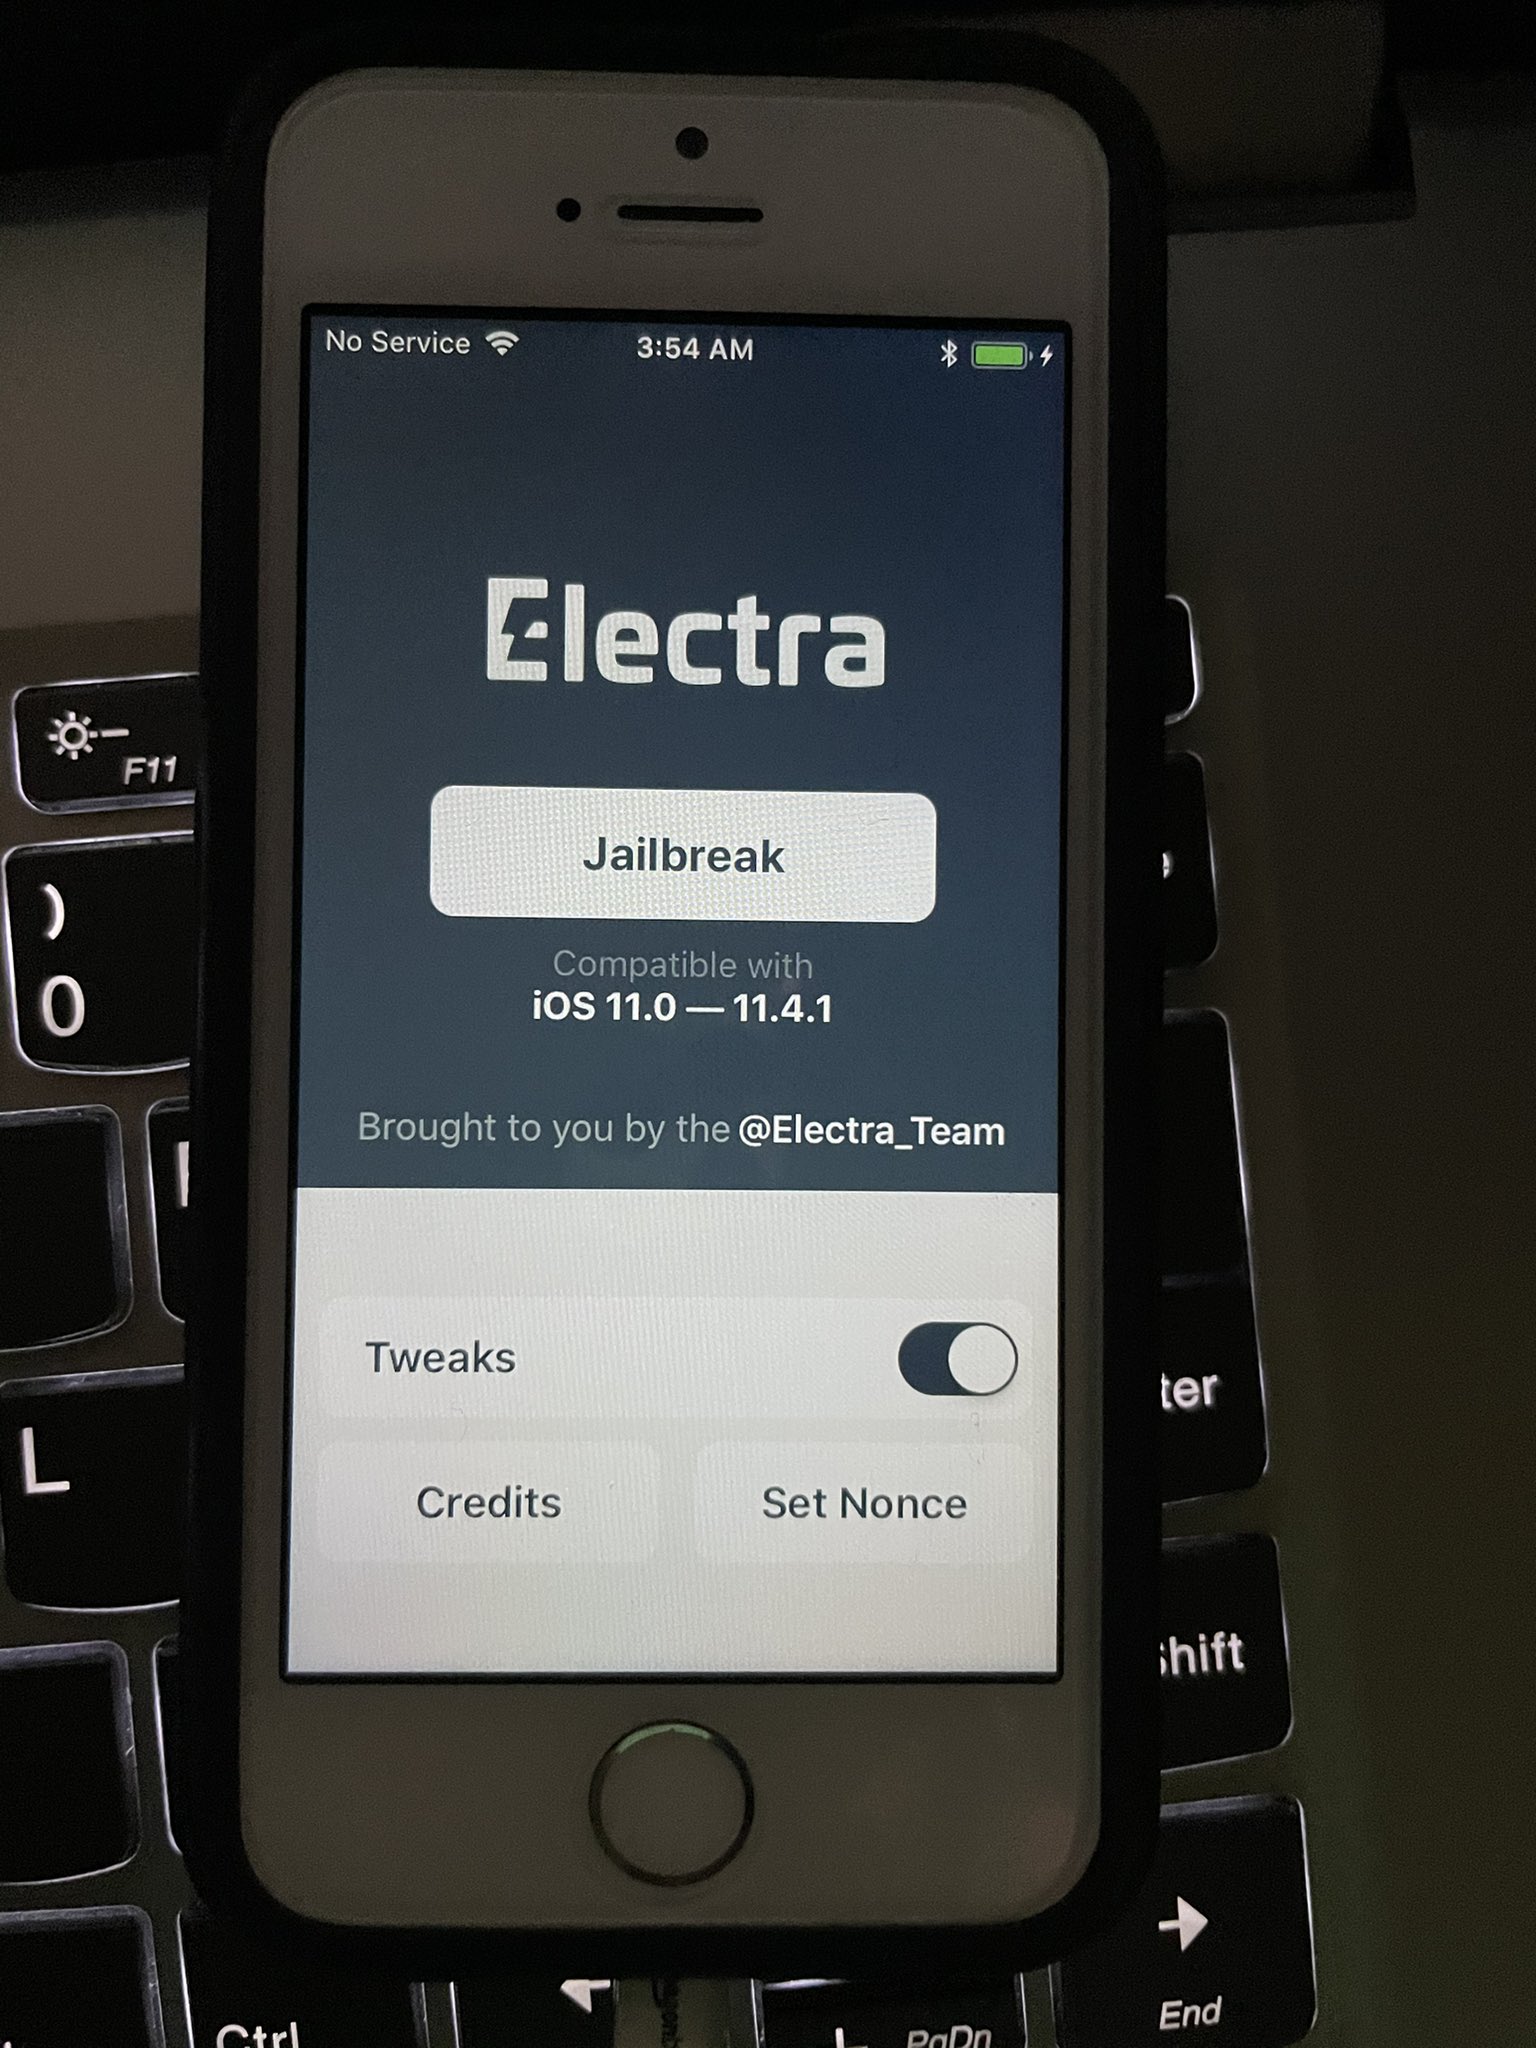 CoolStar on Twitter: "Been a while since I've seen this on a device.  Anyways Electra 2 is available on https://t.co/YxbYAmMkVK Ships with Sileo  1.9.1 and libhooker, and removes Cydia This is effectively